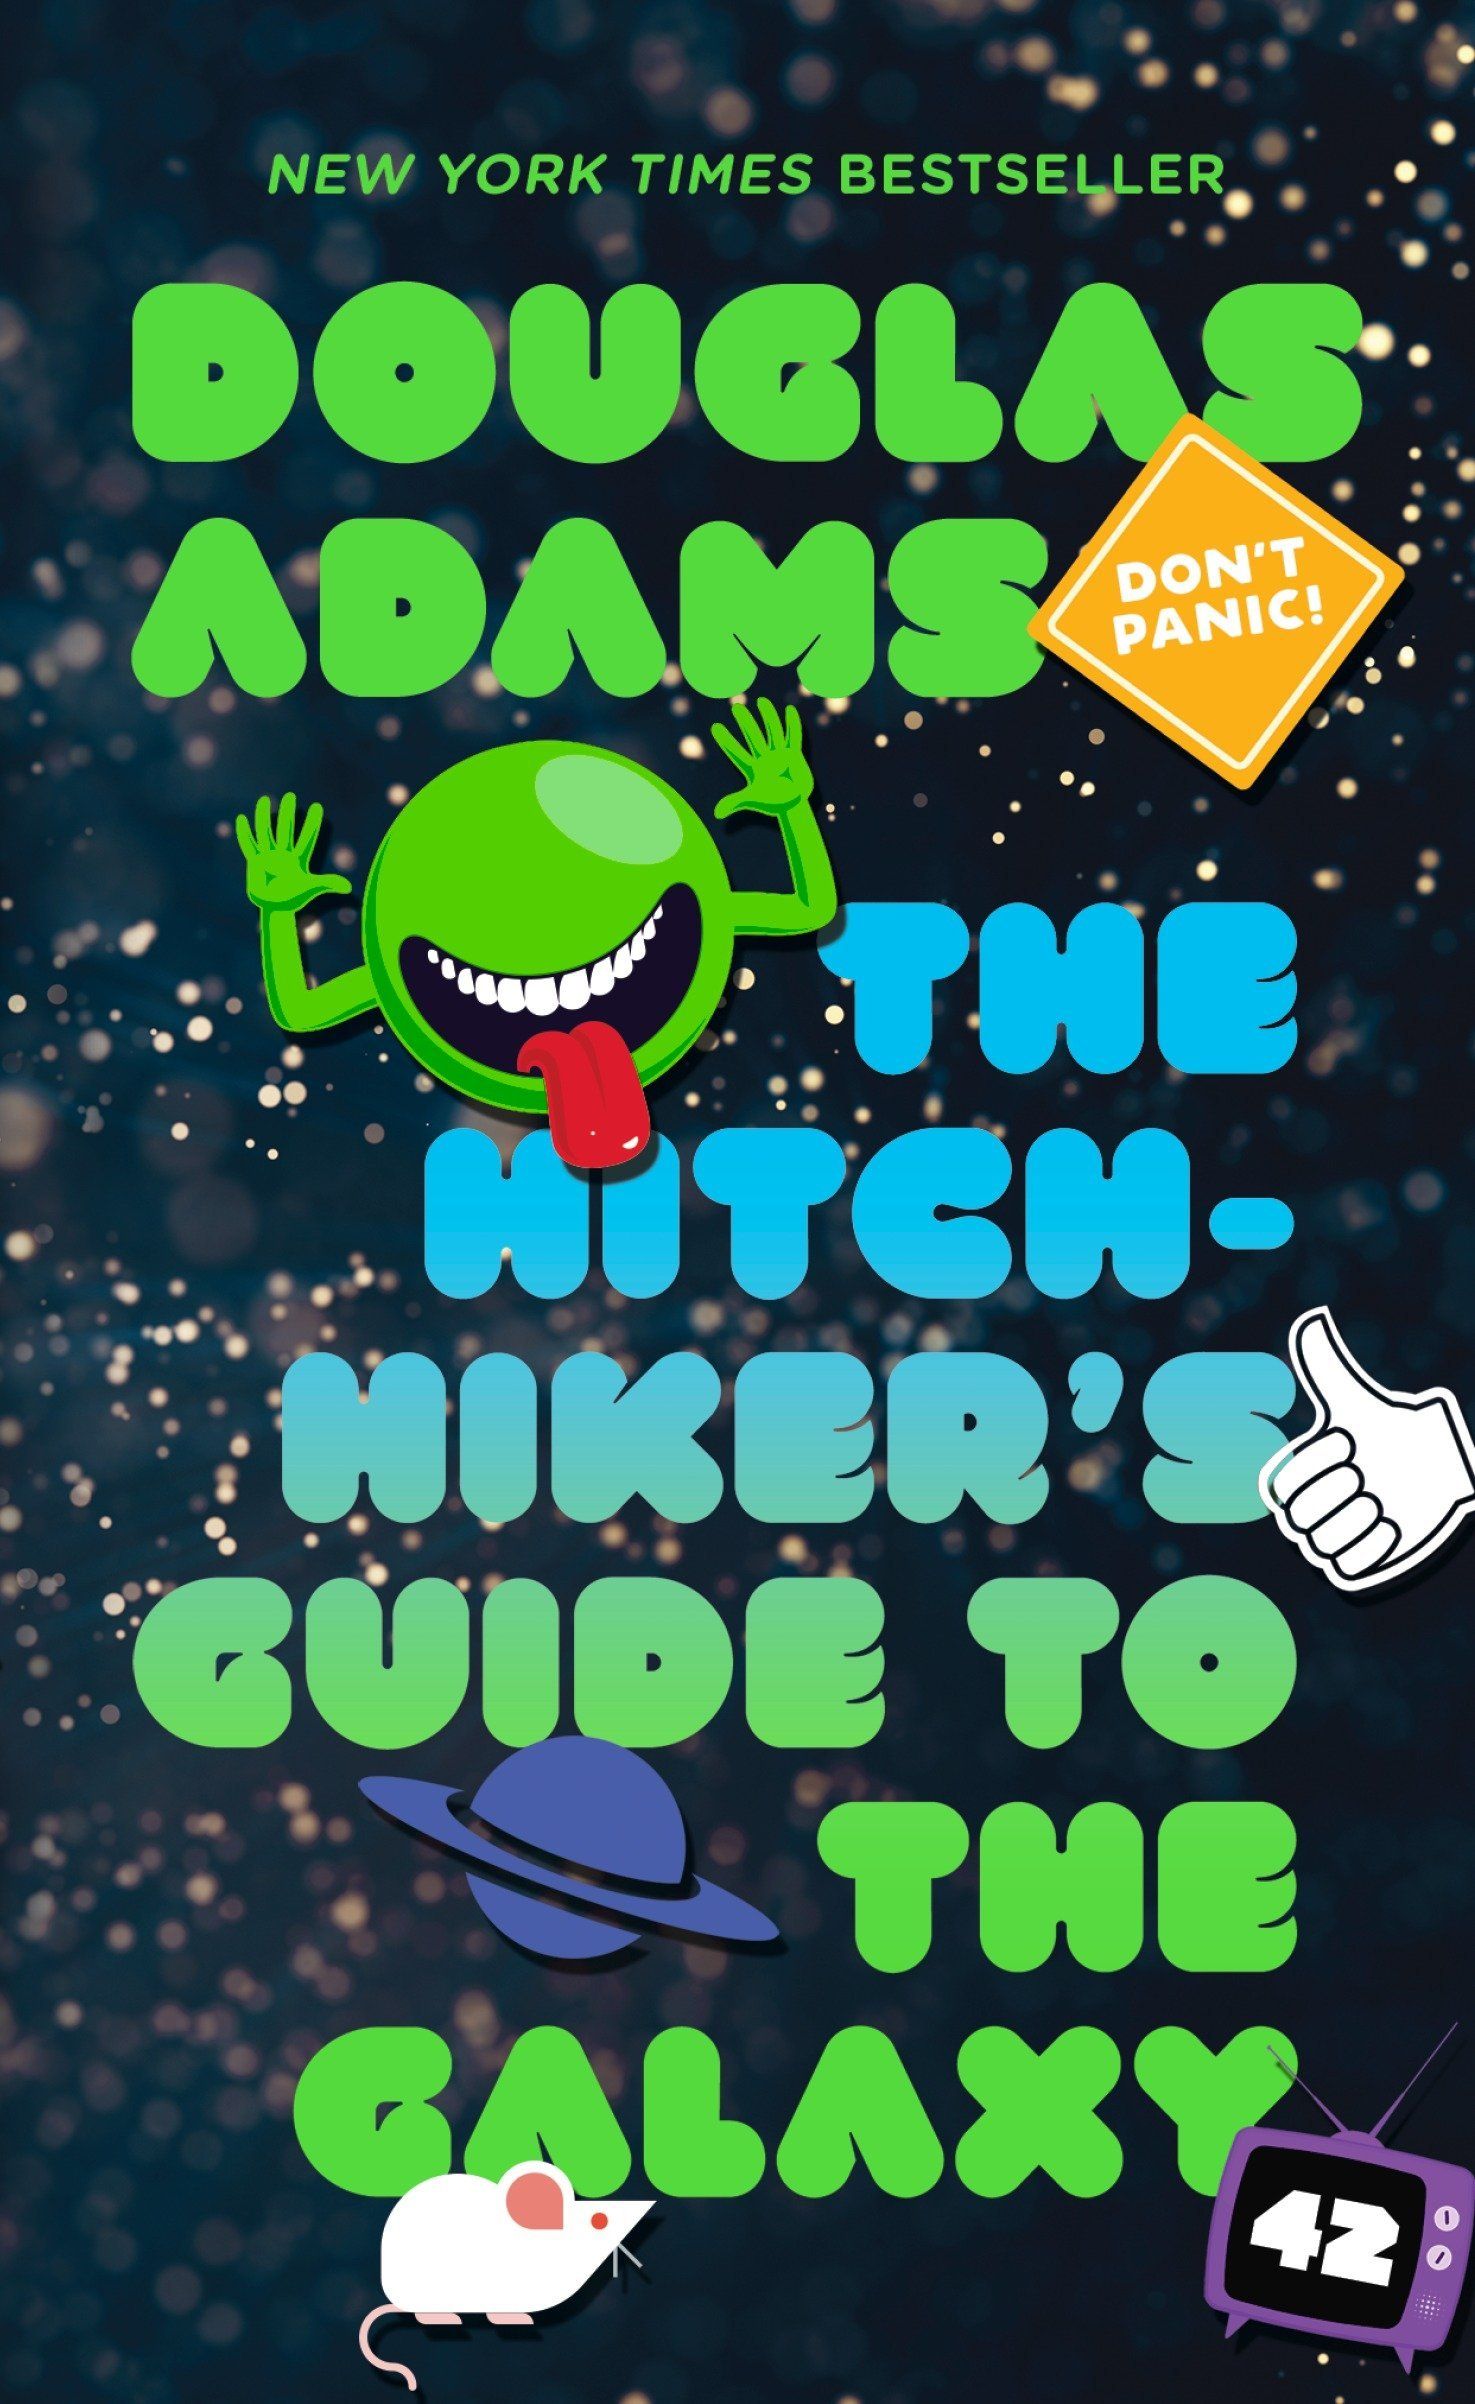 hitchhiker's guide to the galaxy book cover